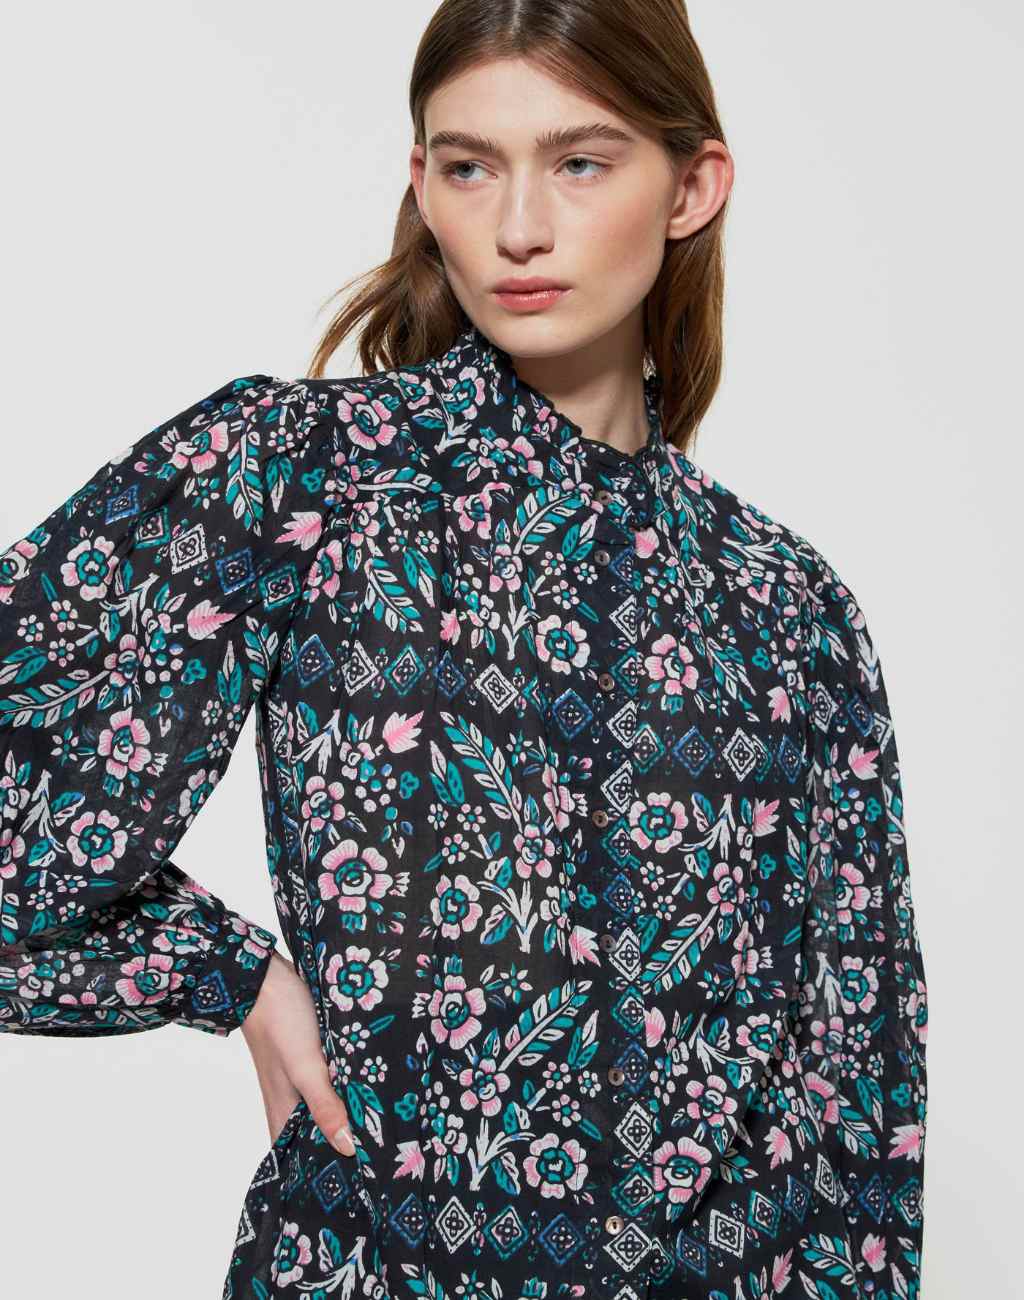 Block Print Flora Blouse with Floral and Geometric Print, Ruffle Collar, and Puffed Sleeves - Visit Nifty Antik Batik 